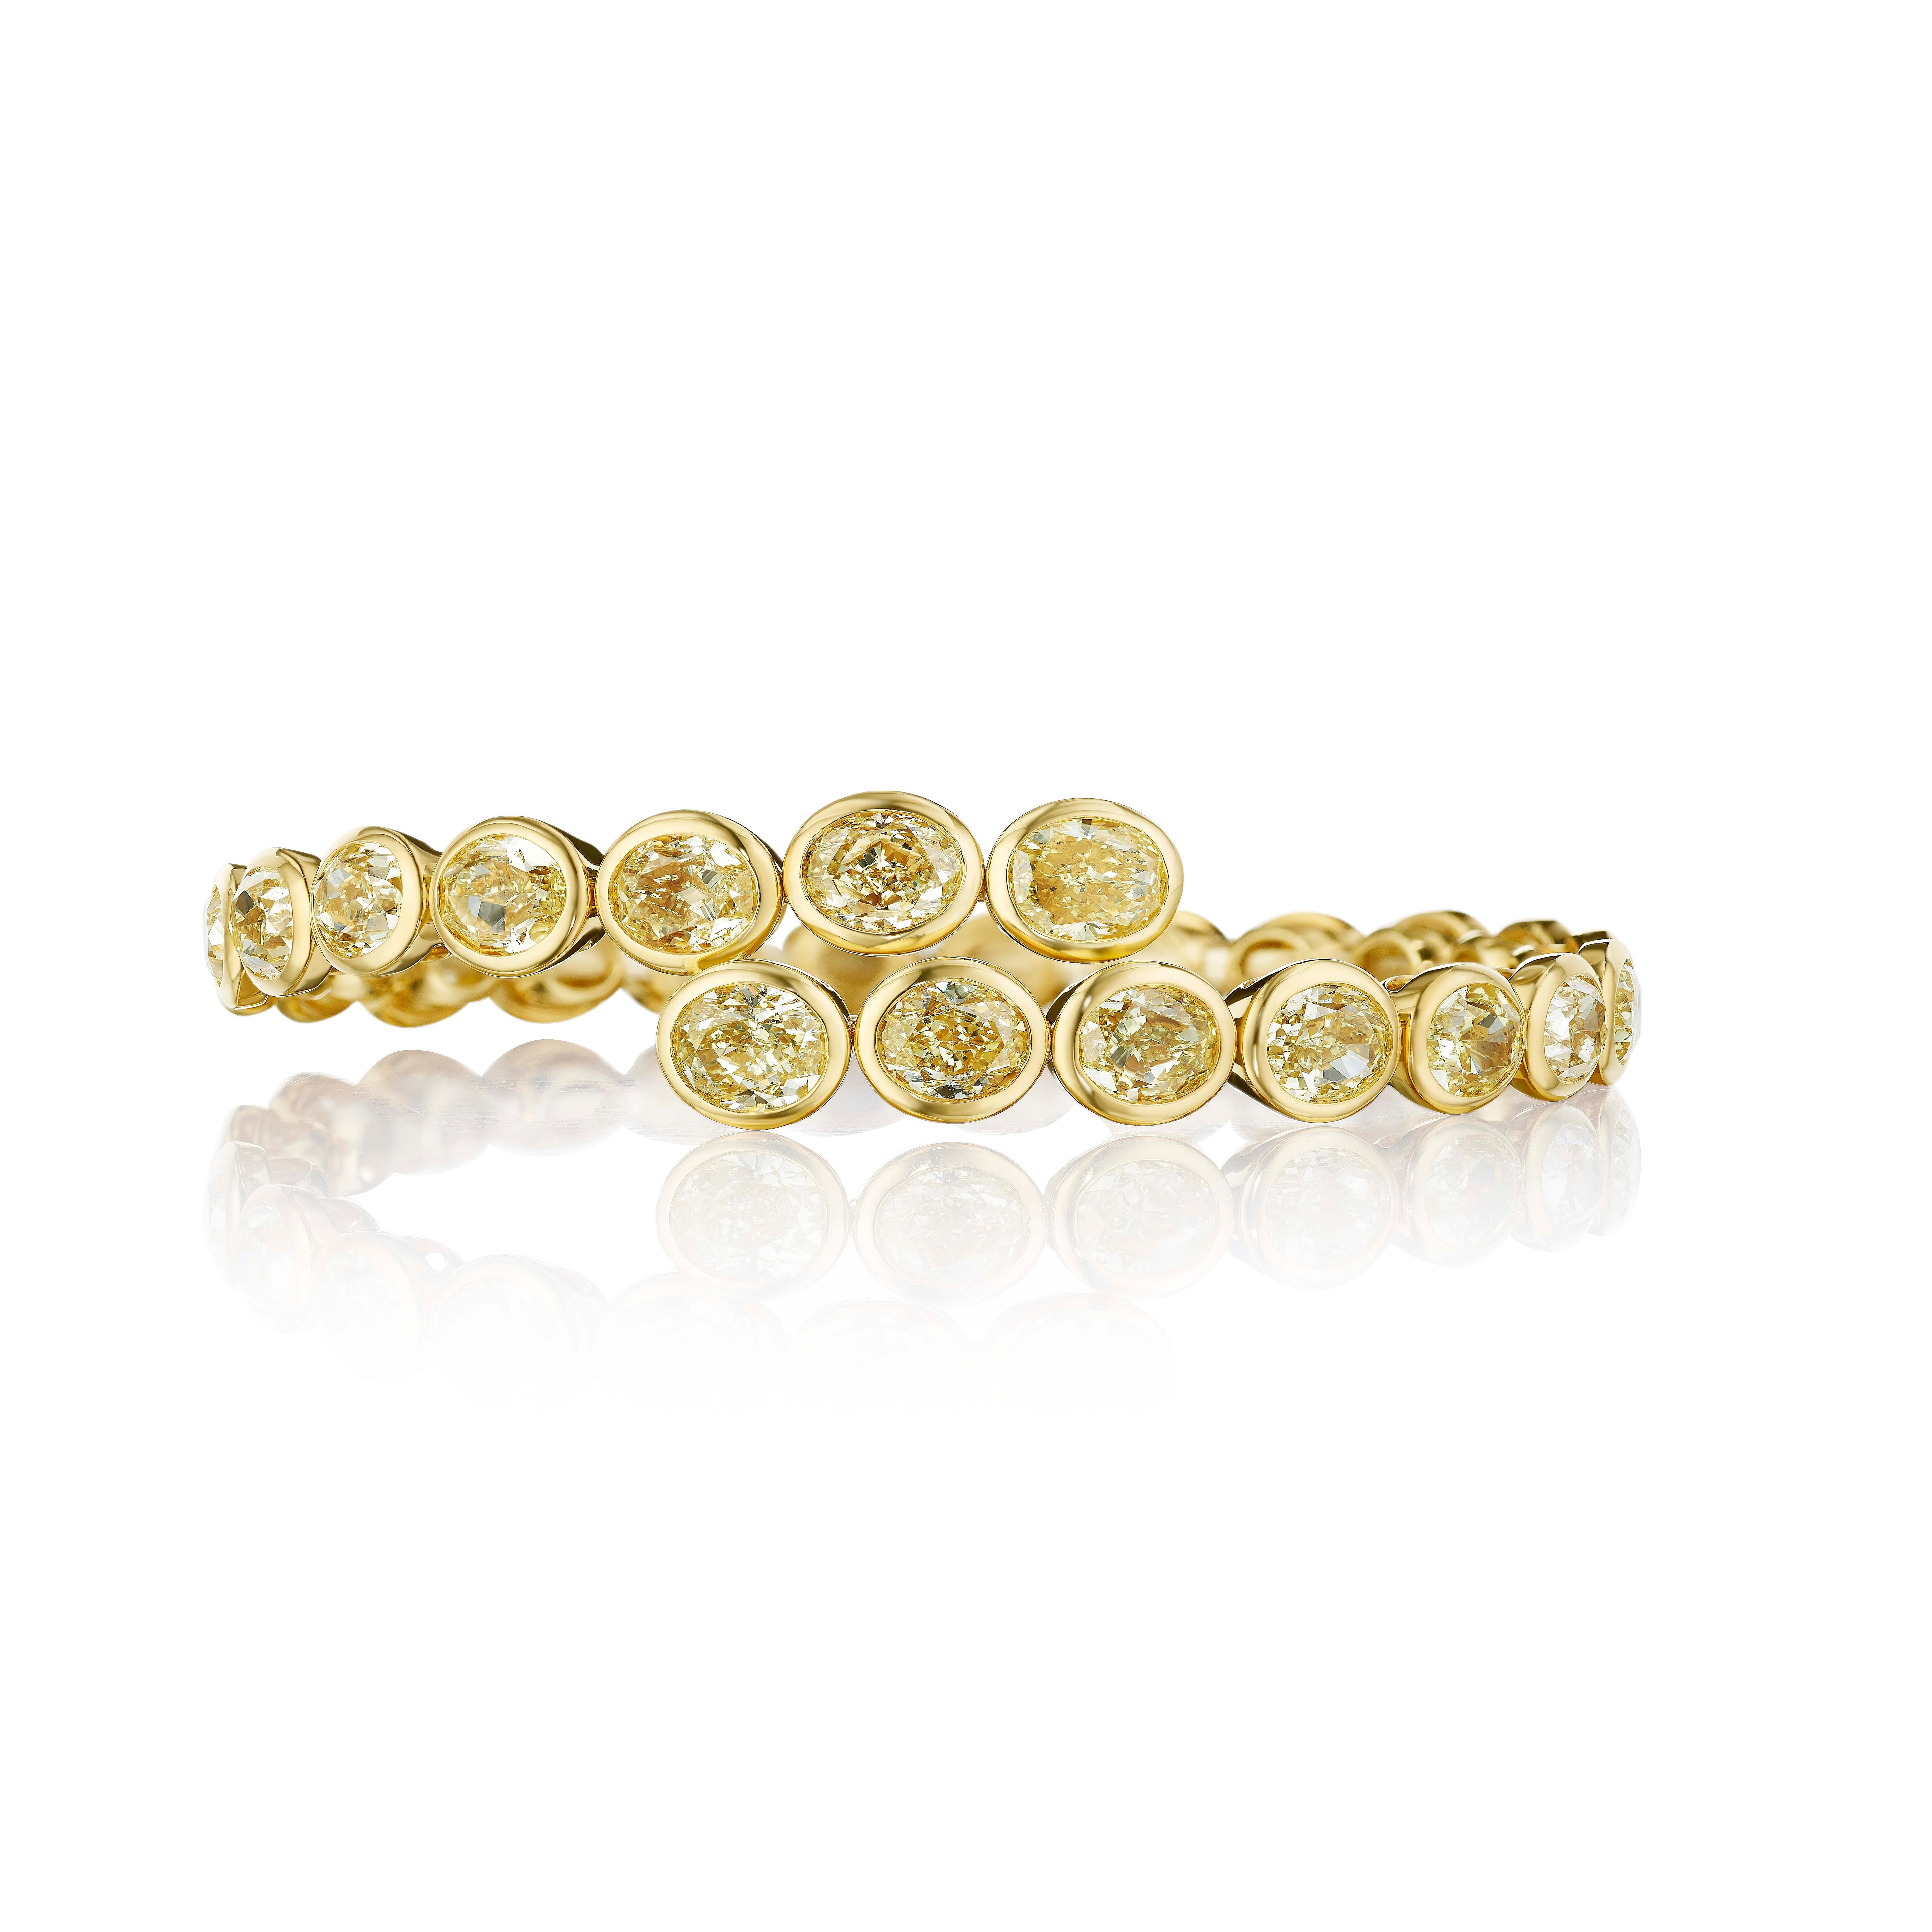 Gorgeous bangle bracelet with a spring for flexibility, interlocking at the center for a curvy and magnificent look.
20 Oval yellow Diamonds weighing 18.45 Carats.
Stones weigh between 0.90-1.0 Carat.

Set in 18 Karat Yellow Gold